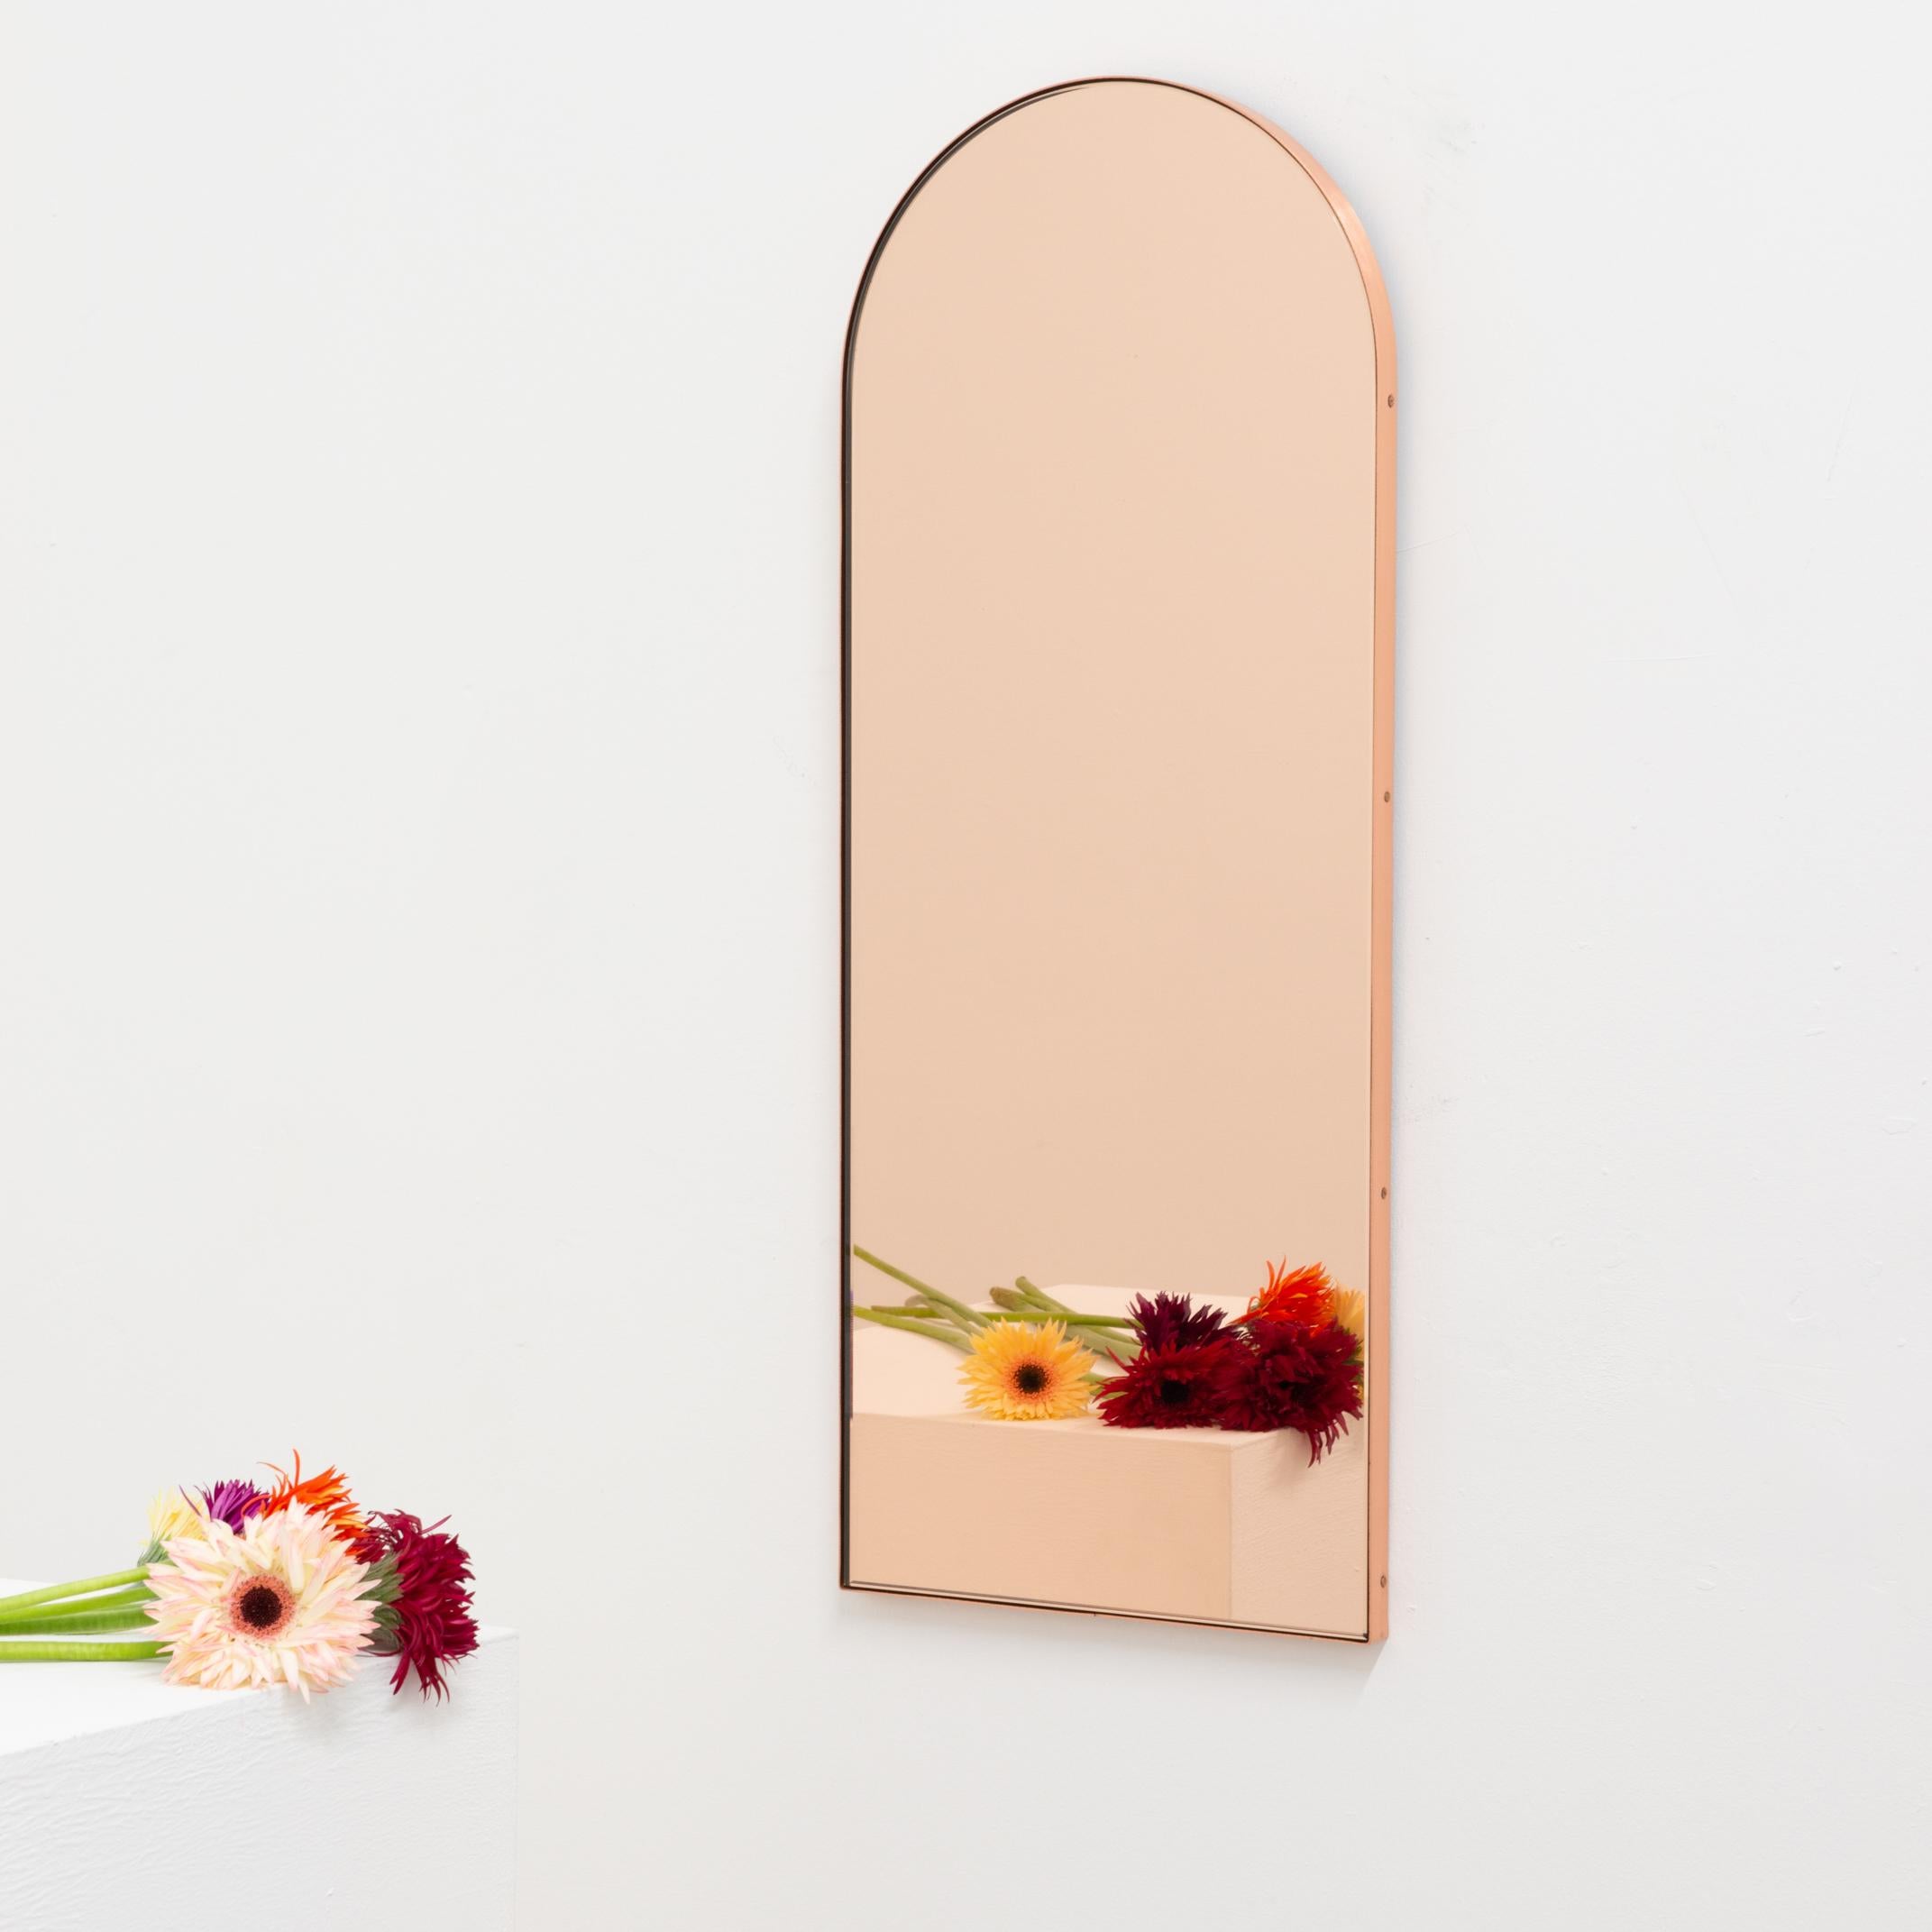 In Stock Arcus Arched Peach Contemporary Mirror with Copper Frame, Small In New Condition In London, GB